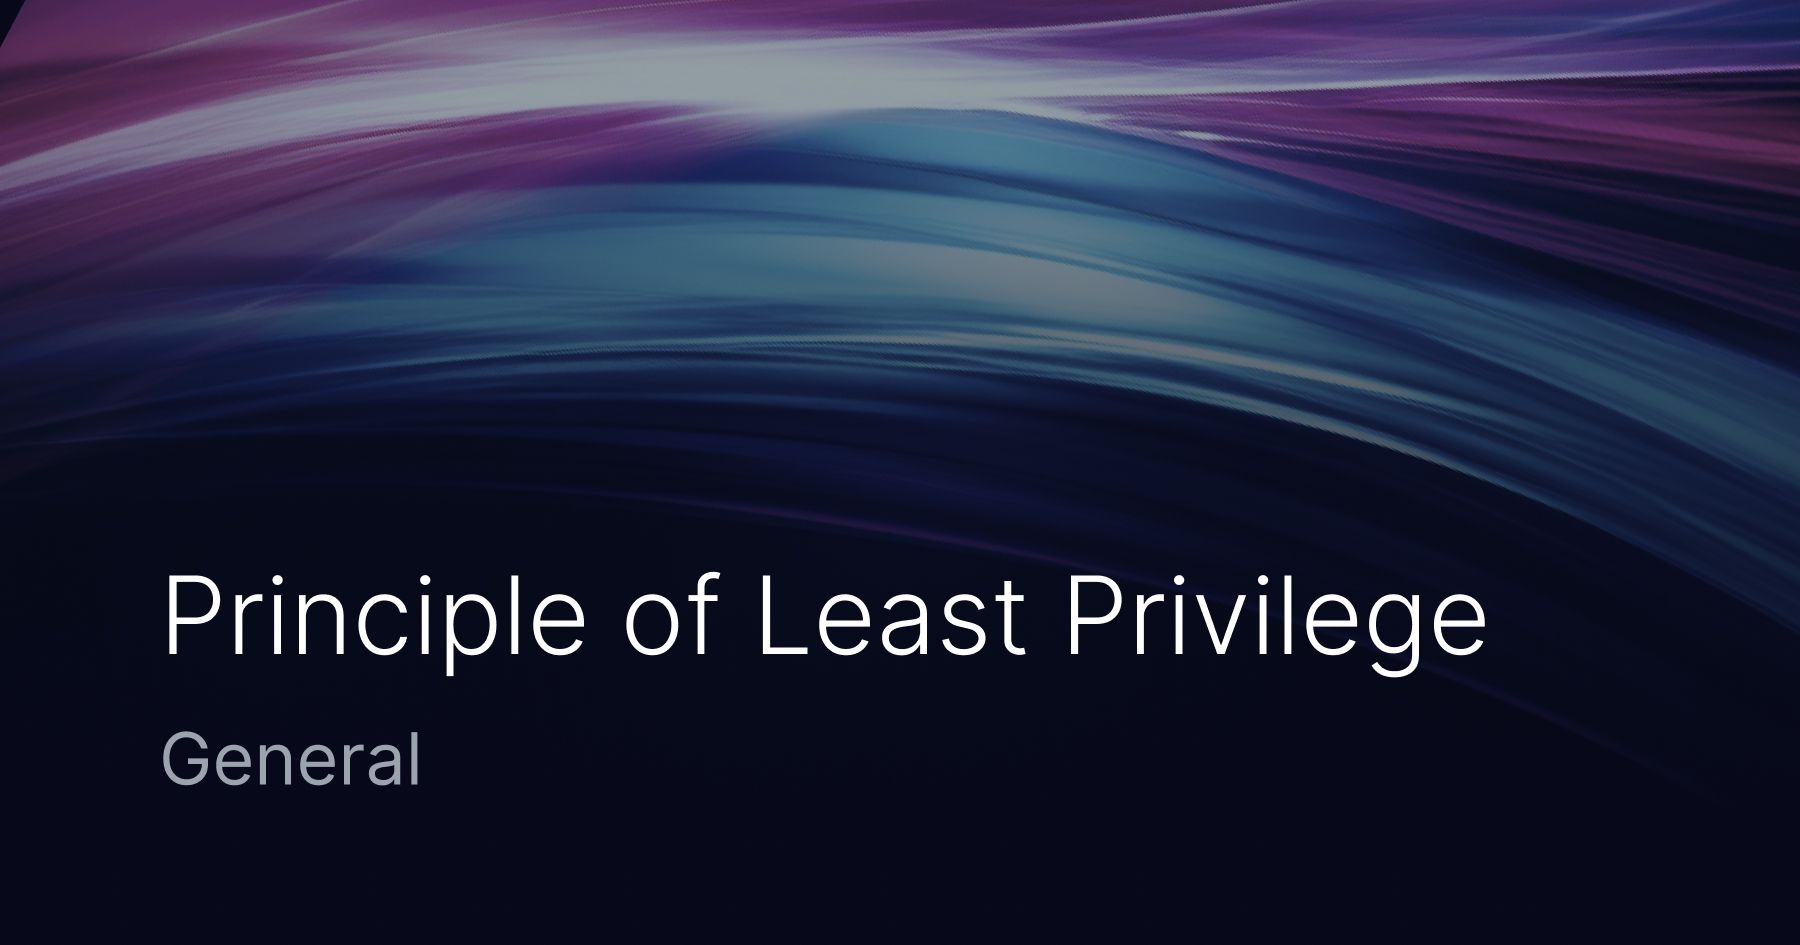 What is the Principle of Least Privilege (POLP)?